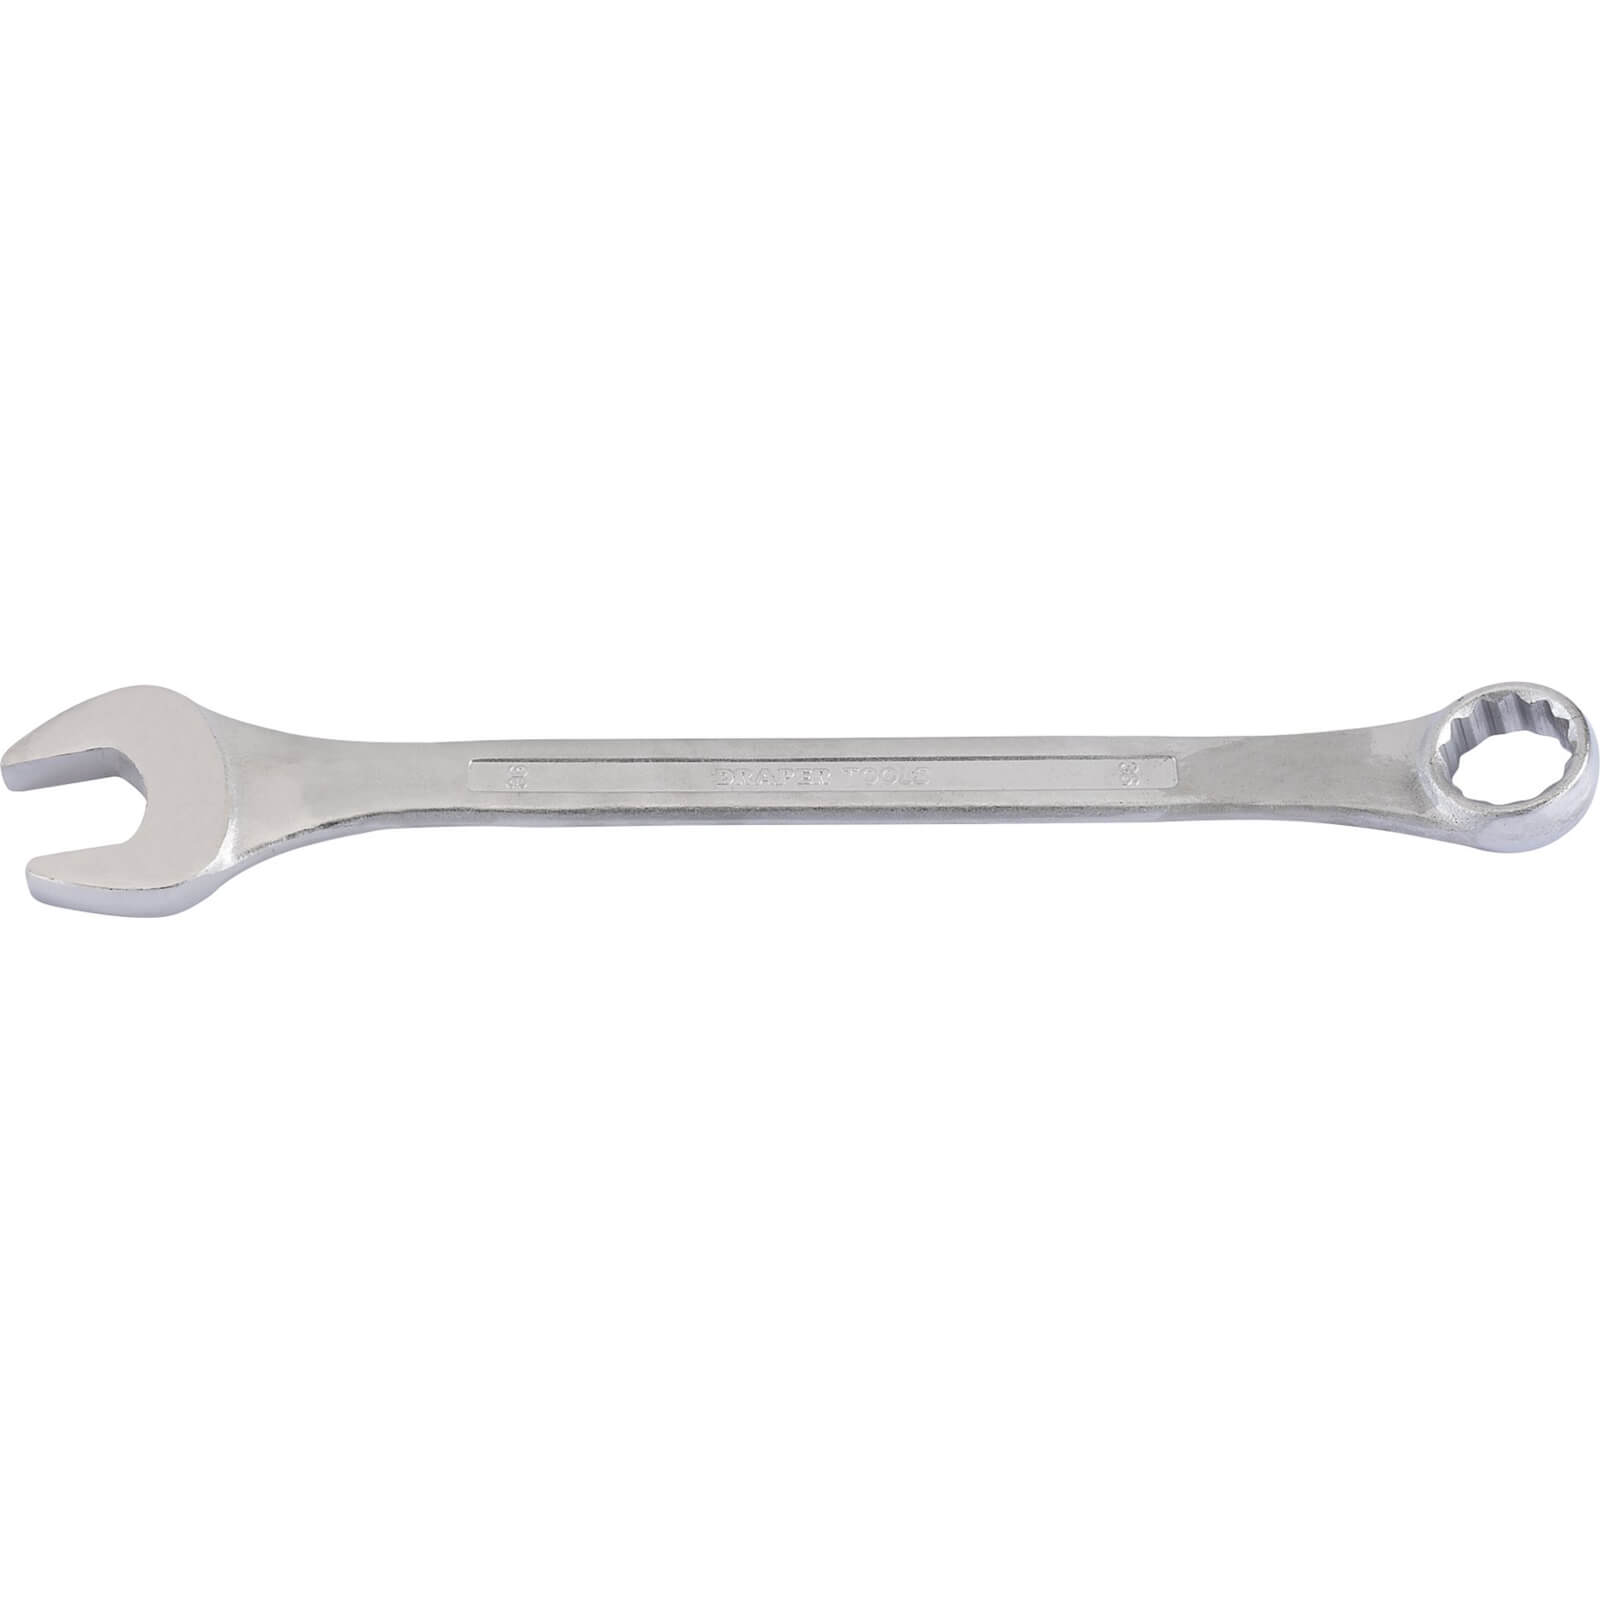 Photos - Wrench Draper Heavy Duty Long Combination Spanner 36mm 8220 MM 